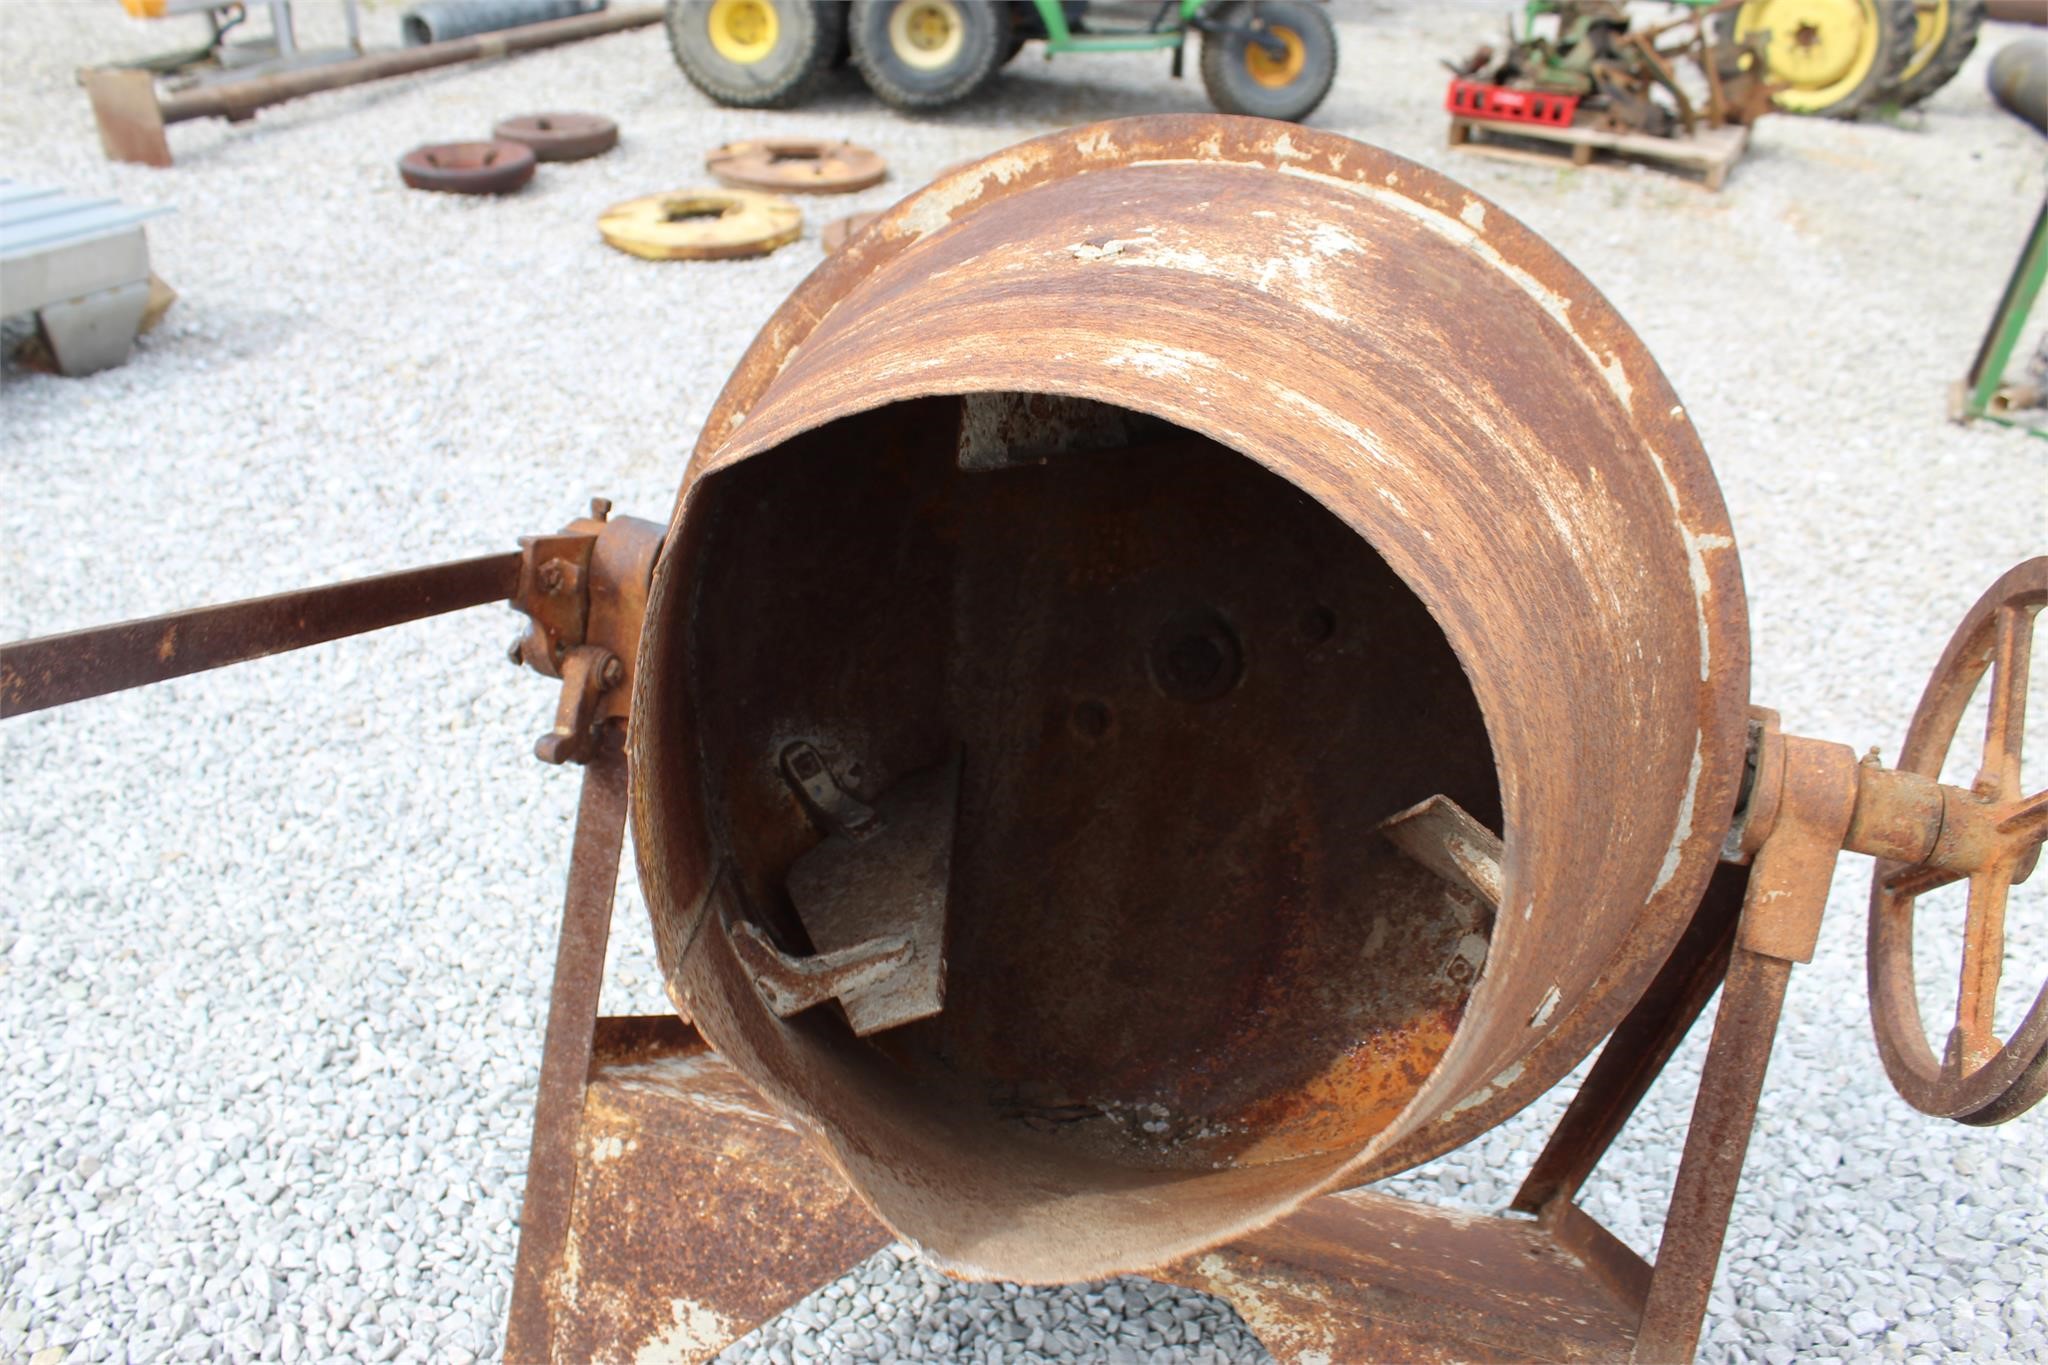 AuctionTime.com | CUSTOM MADE CEMENT MIXER Online Auctions